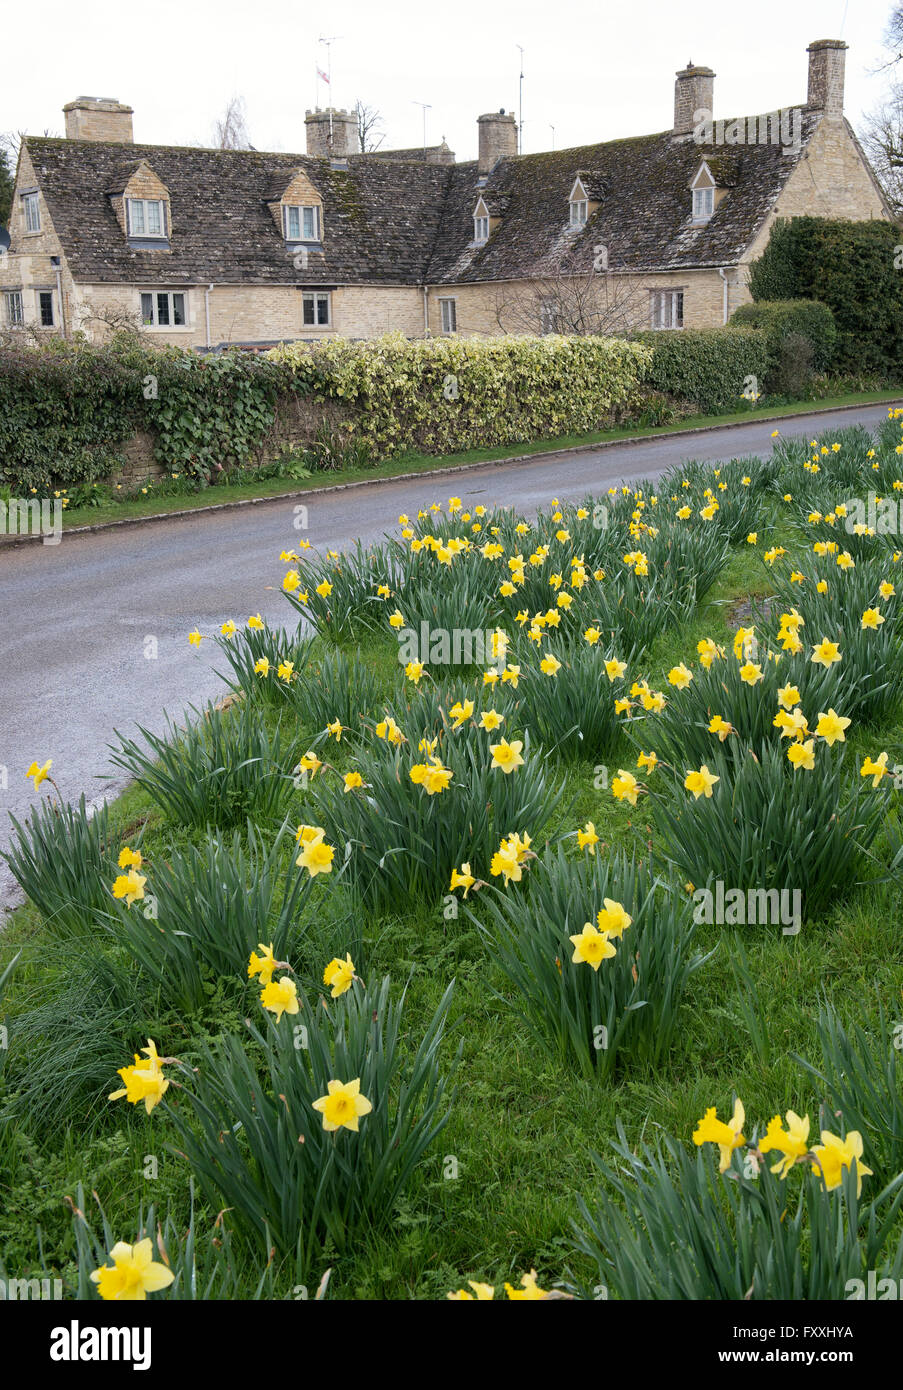 Daffodils on the roadside in spring. Swinbrook, Oxfordshire, England Stock Photo